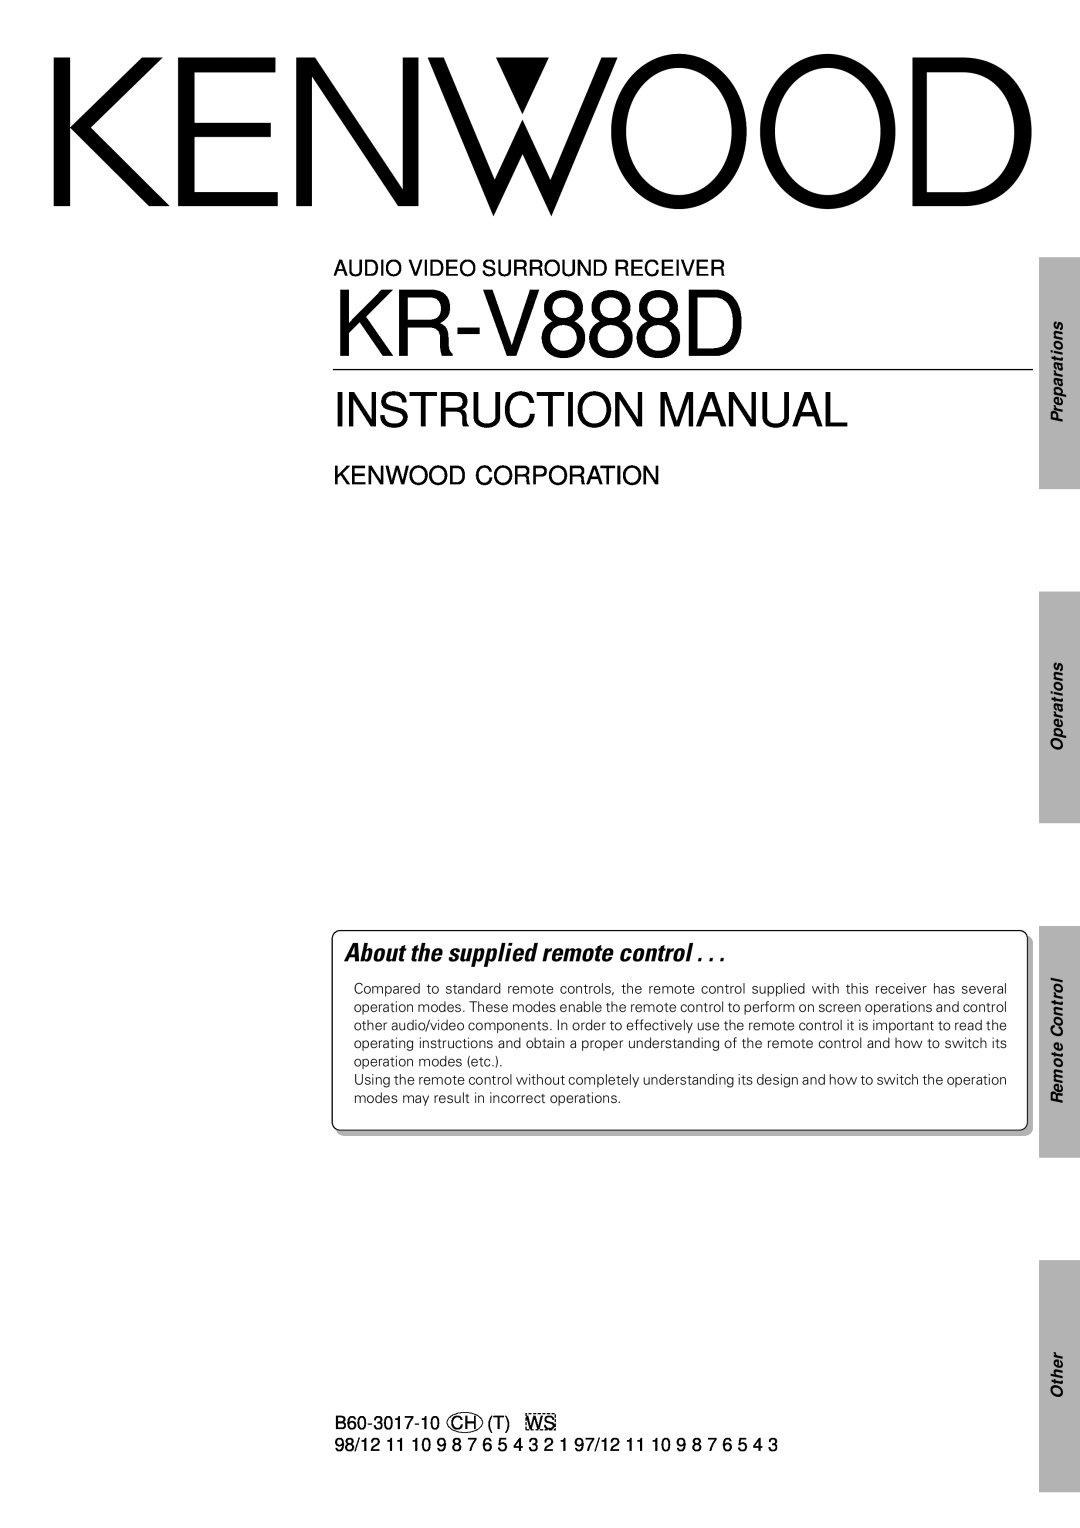 Kenwood KR-V888D instruction manual About the supplied remote control, Kenwood Corporation, Audio Video Surround Receiver 